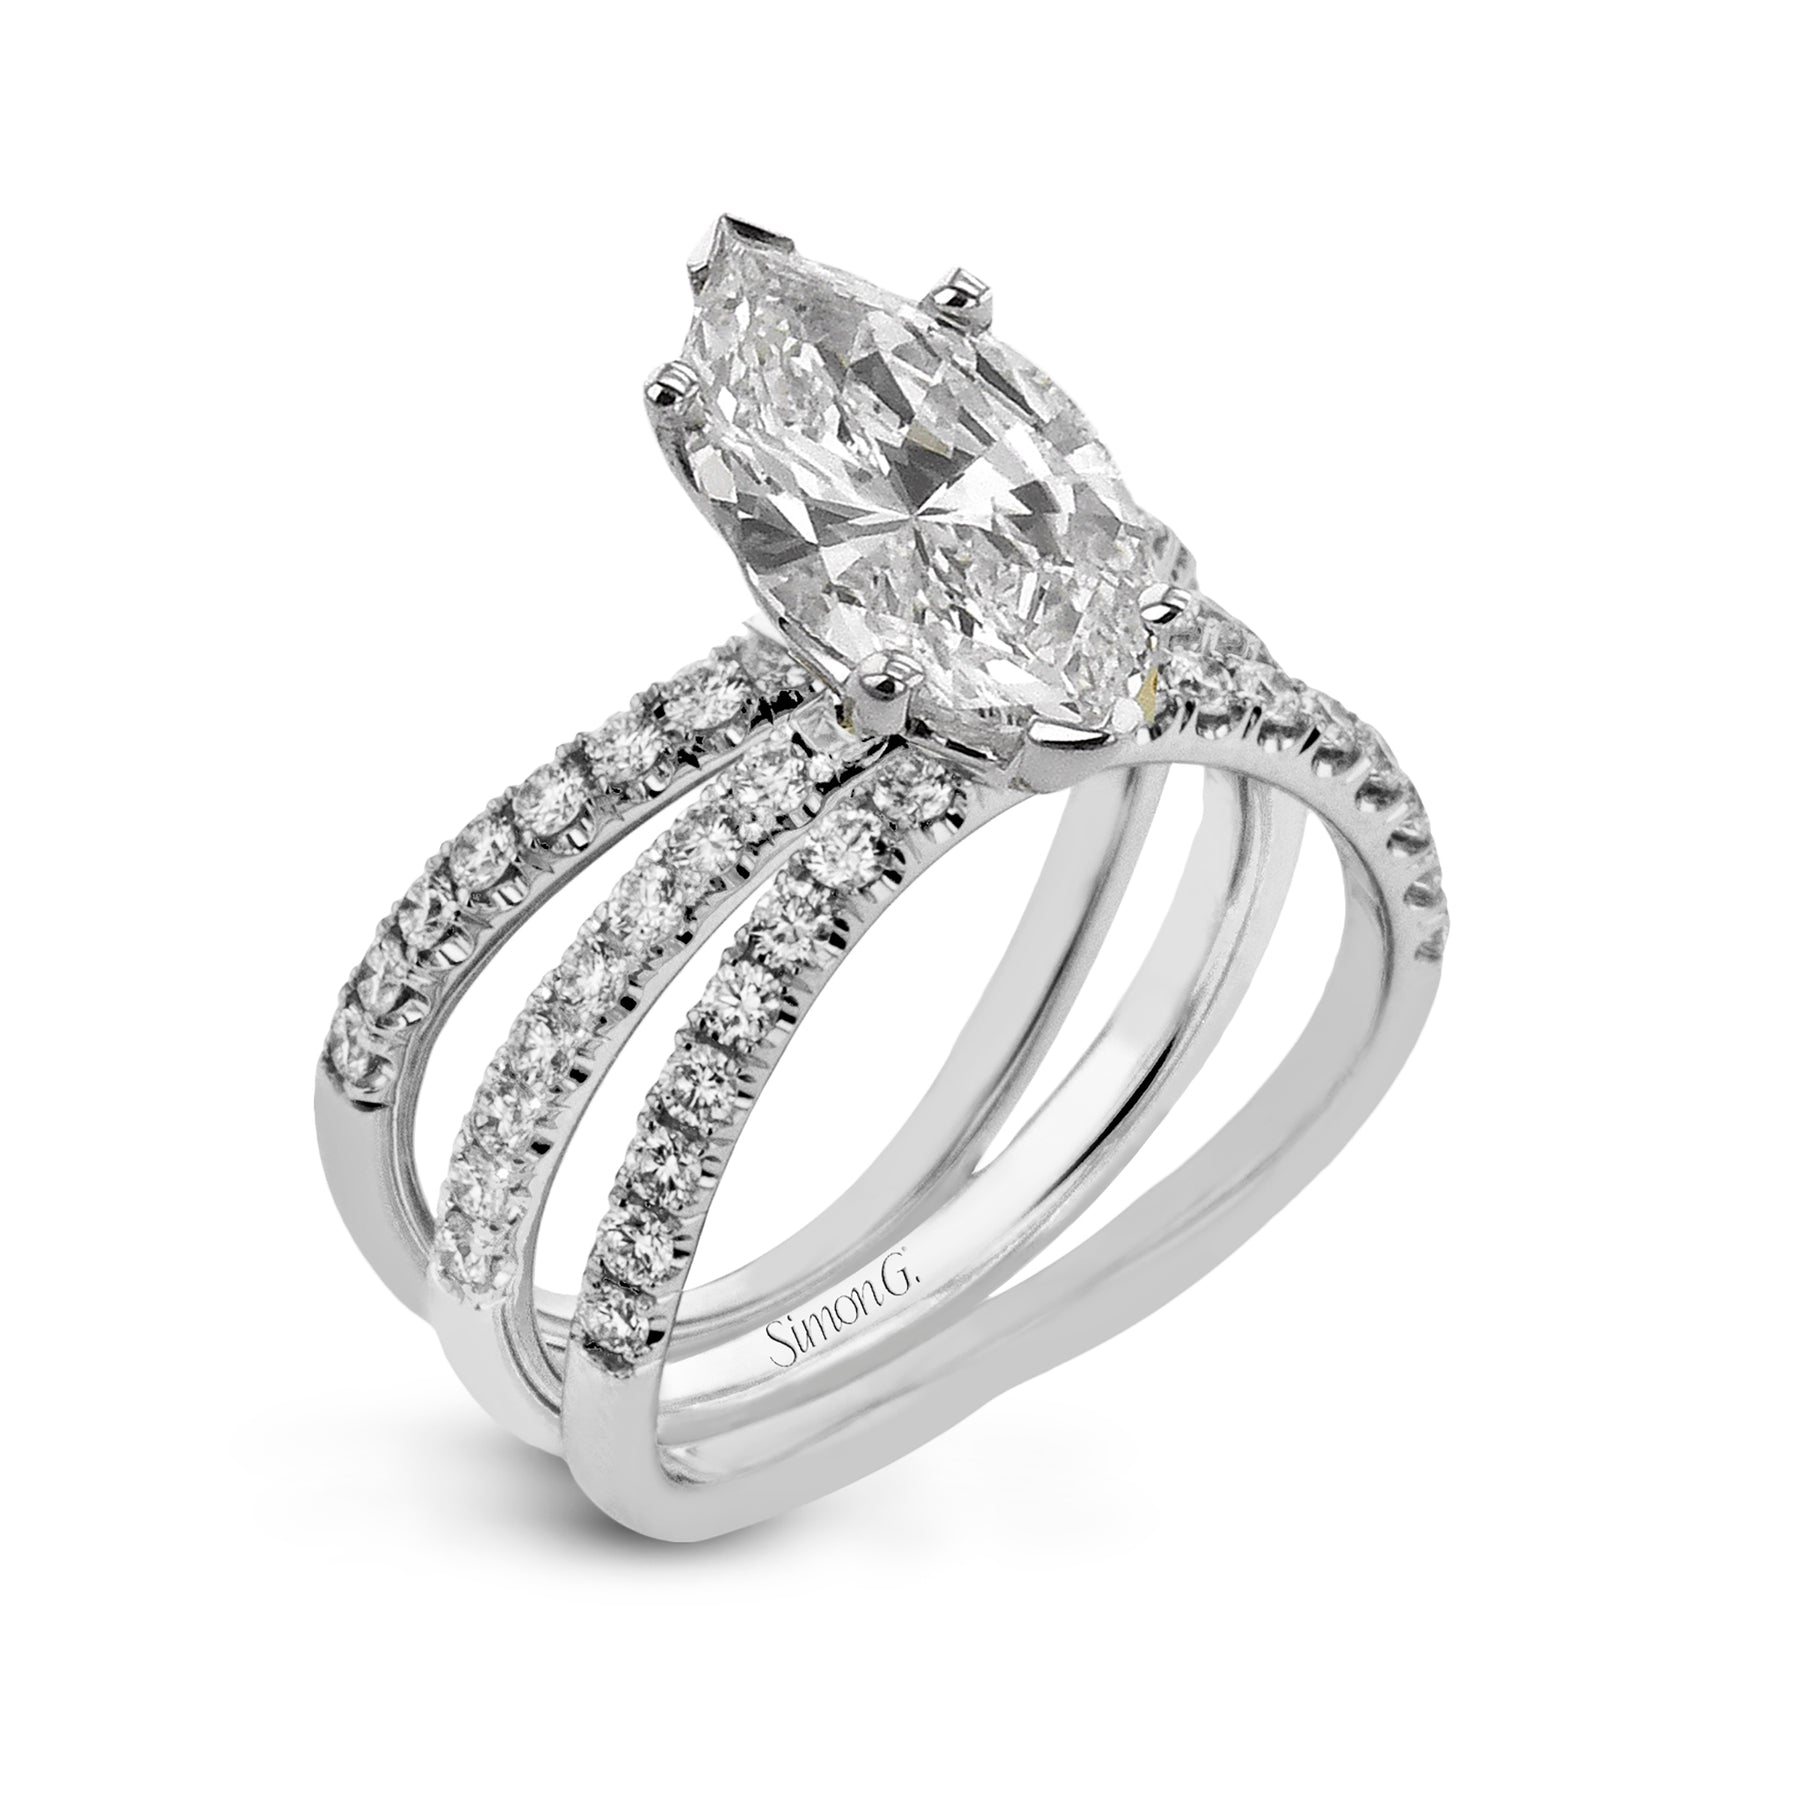 Marquise-cut Engagement Ring & Matching Wedding Band in 18k Gold with Diamonds LR1083-MQ